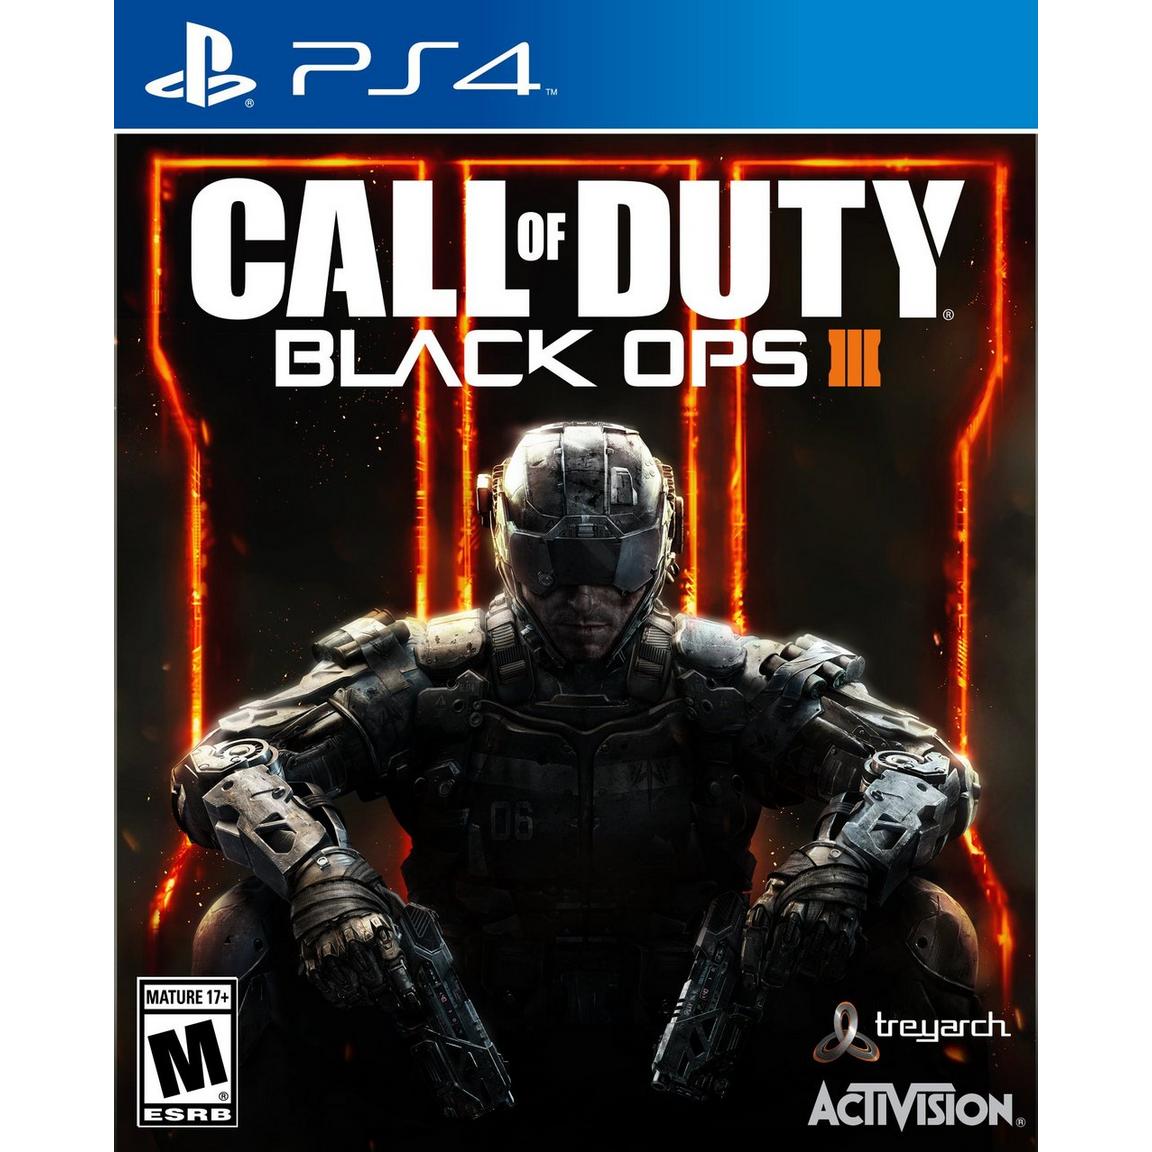 Call of Duty: Black Ops III - PlayStation 4, Pre-Owned -  Activision